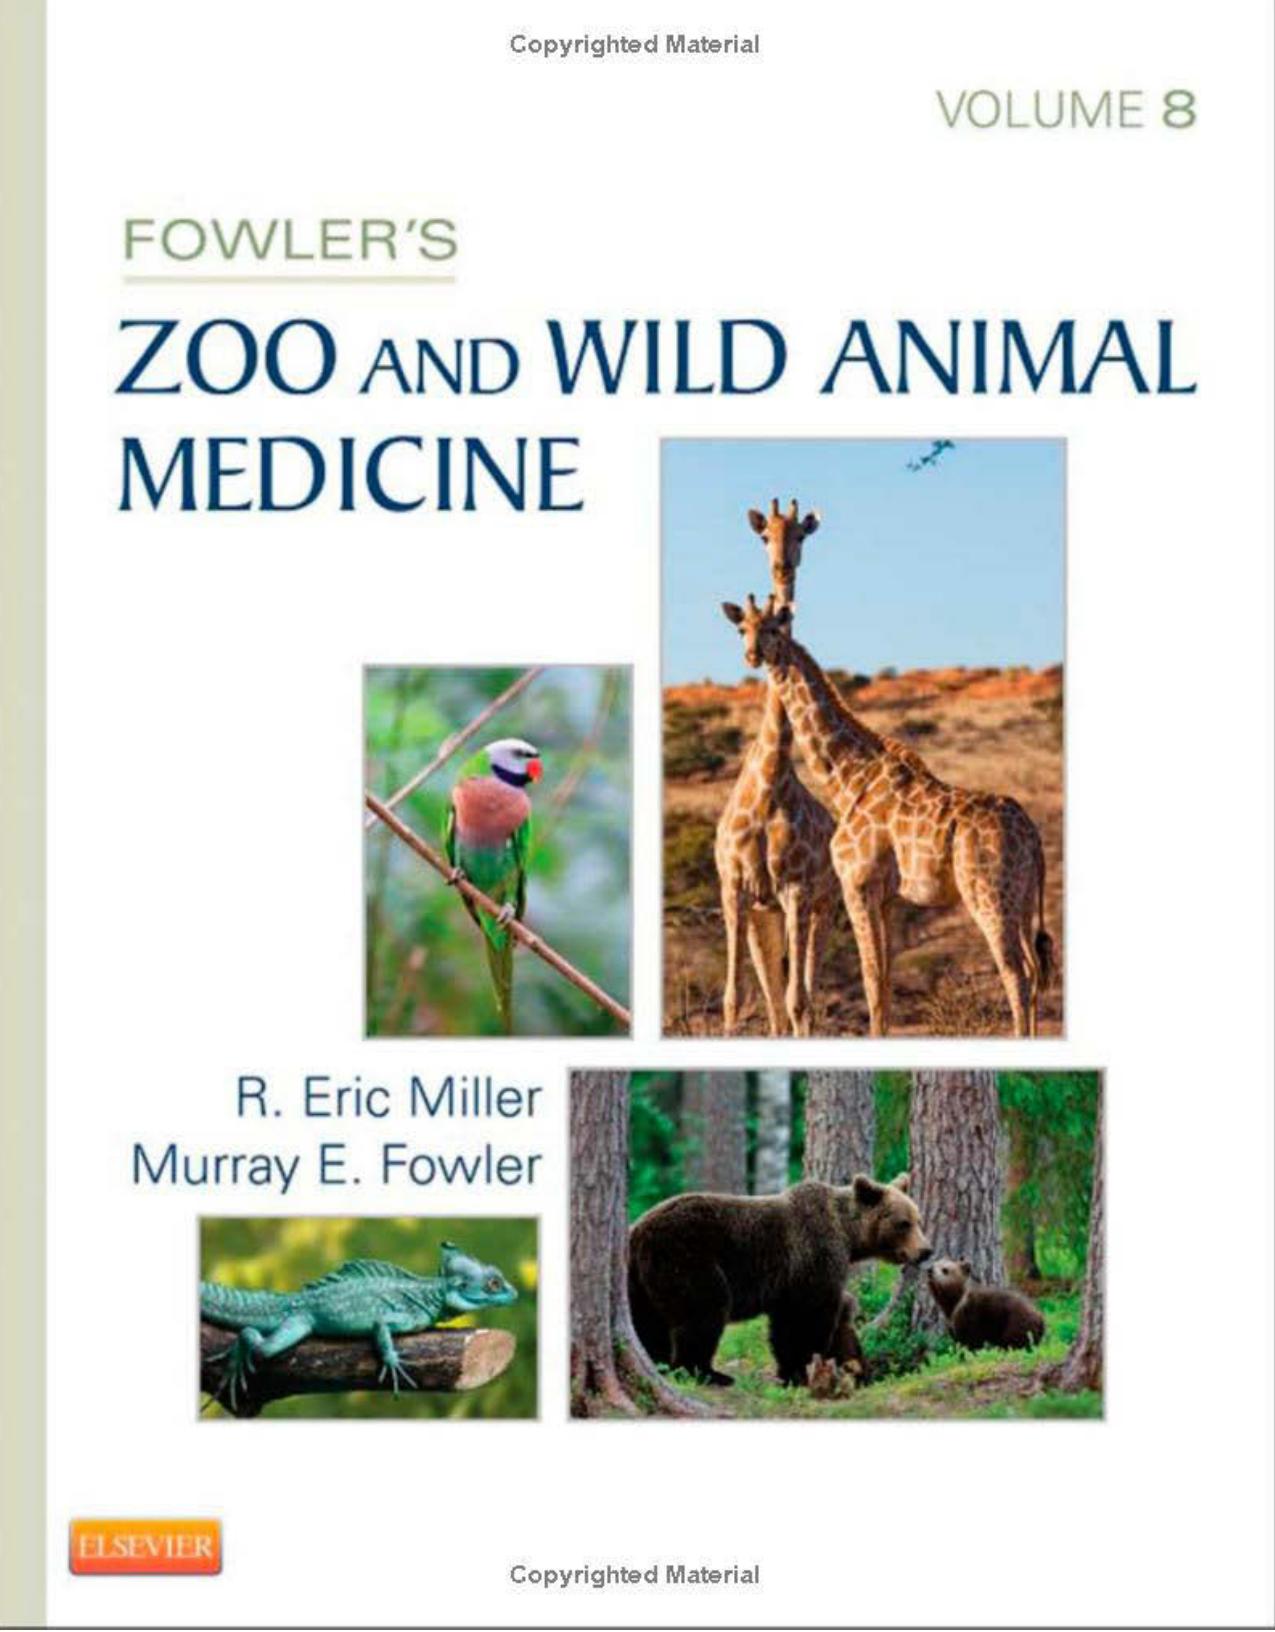 FOWLER’S ZOO AND WILD ANIMAL MEDICINE - 8th Edition [2015][UnitedVRG]